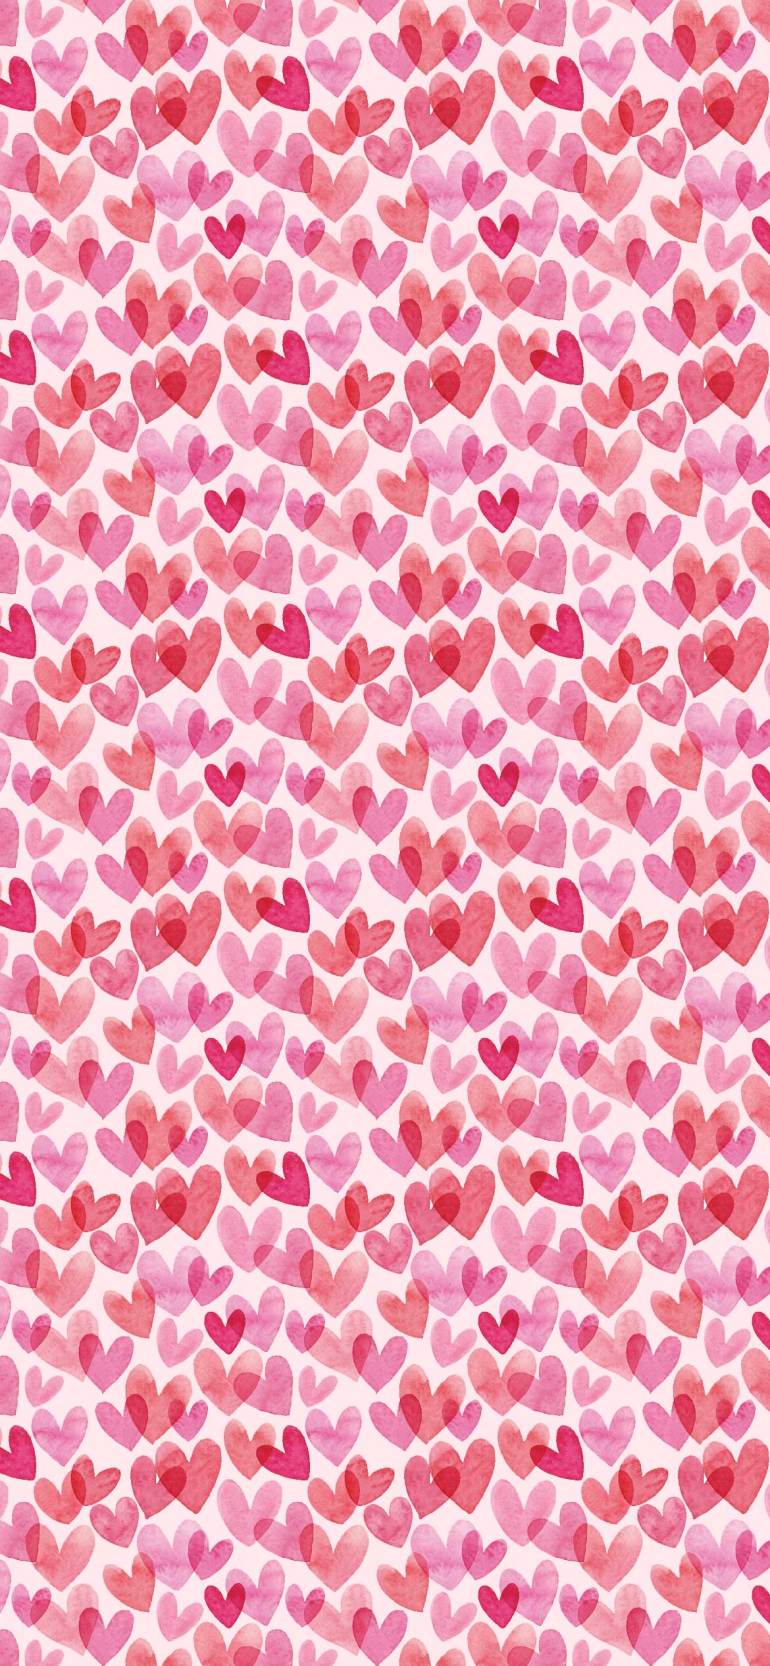 Pink Aesthetic Picture, Pink Heart Wallpaper